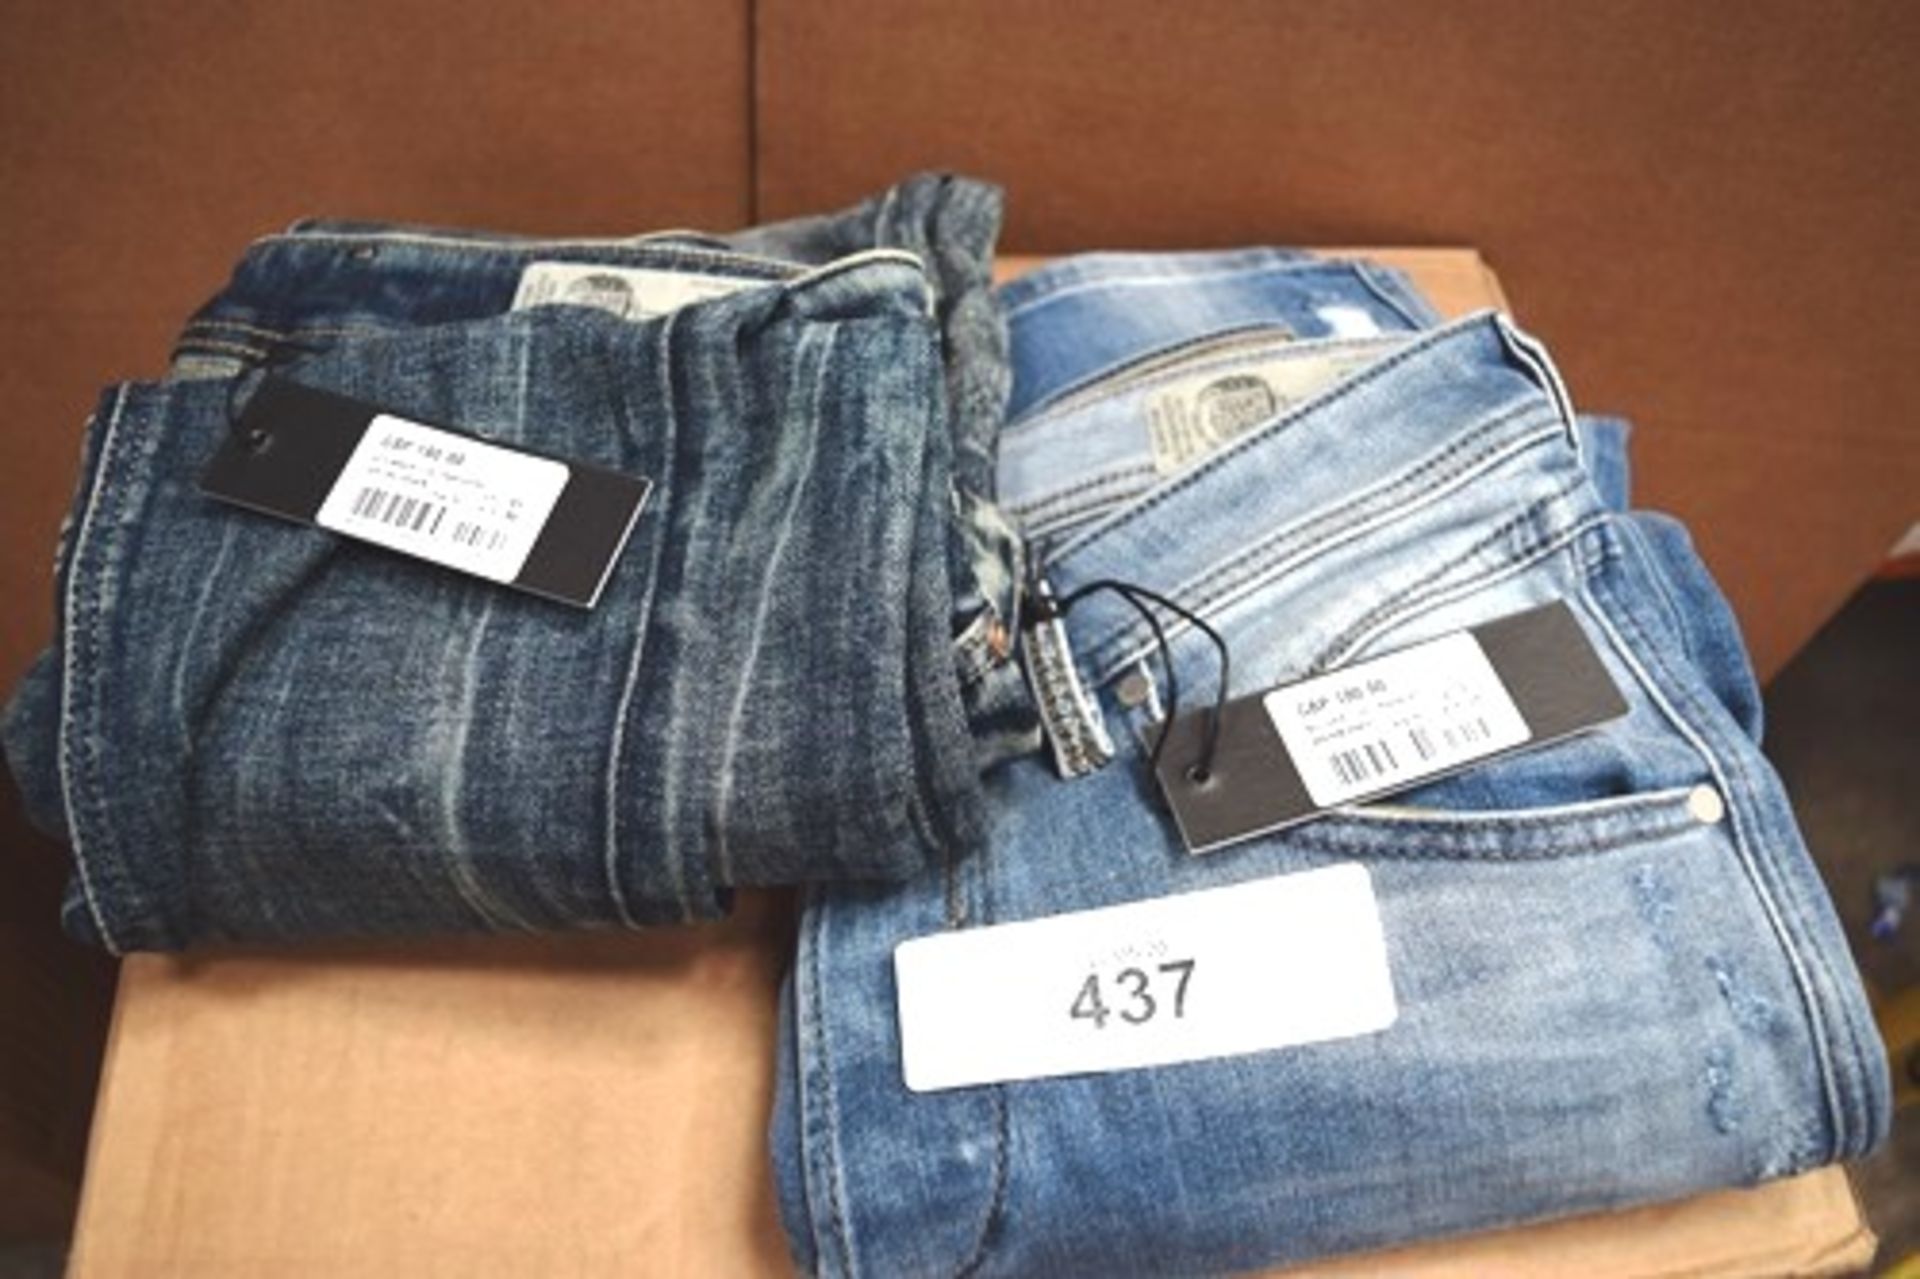 2 x pairs of Diesel jeans comprising 1 x pair Belther size W28/L32 and 1 x pair Sleenker size W30/